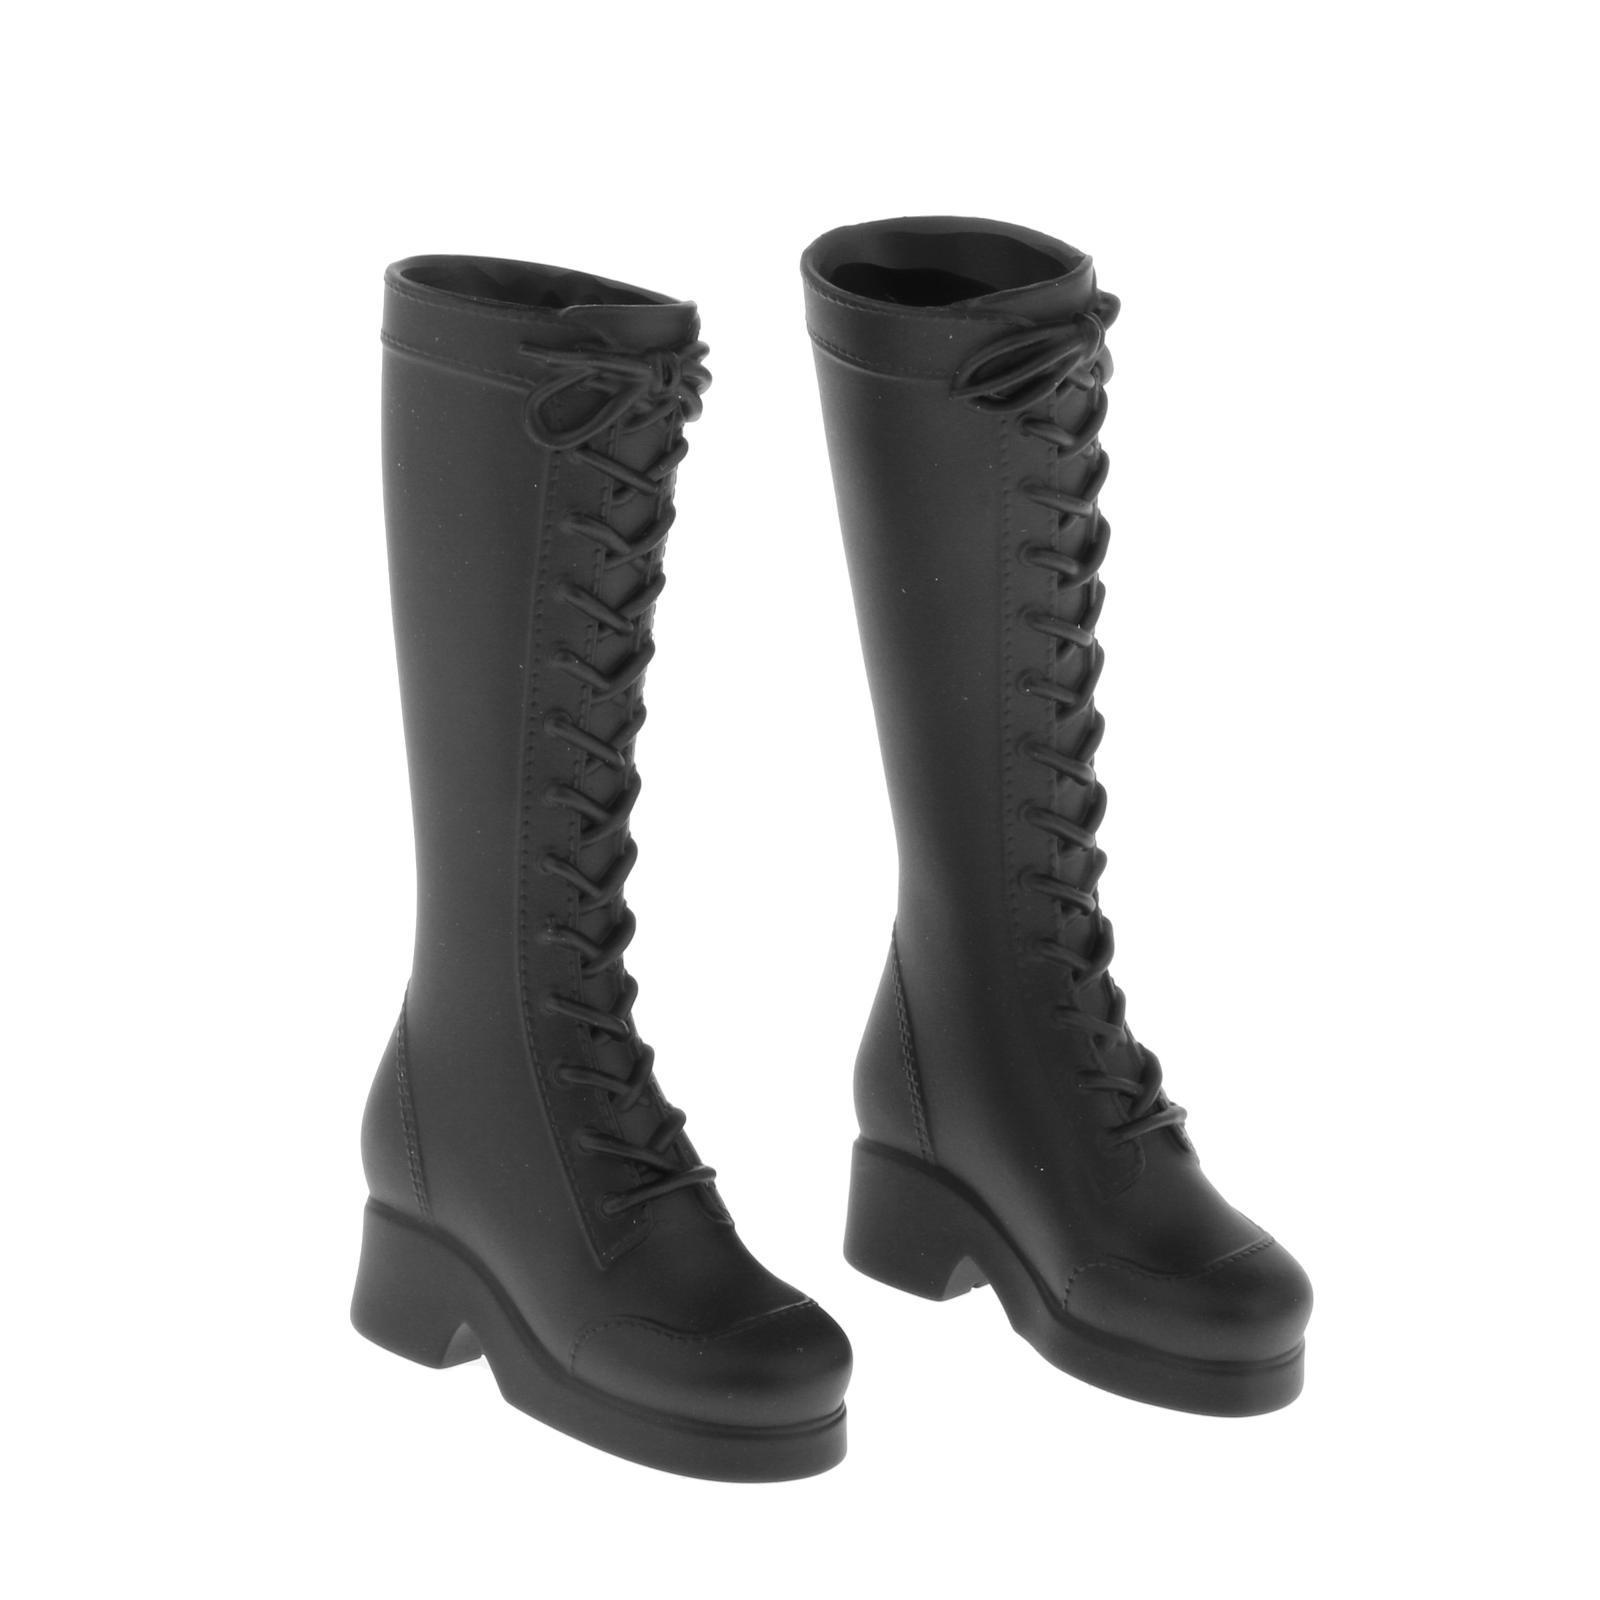 1/6 High-Heeled Combat Boots for 12 Inch Figure Accessories Decor